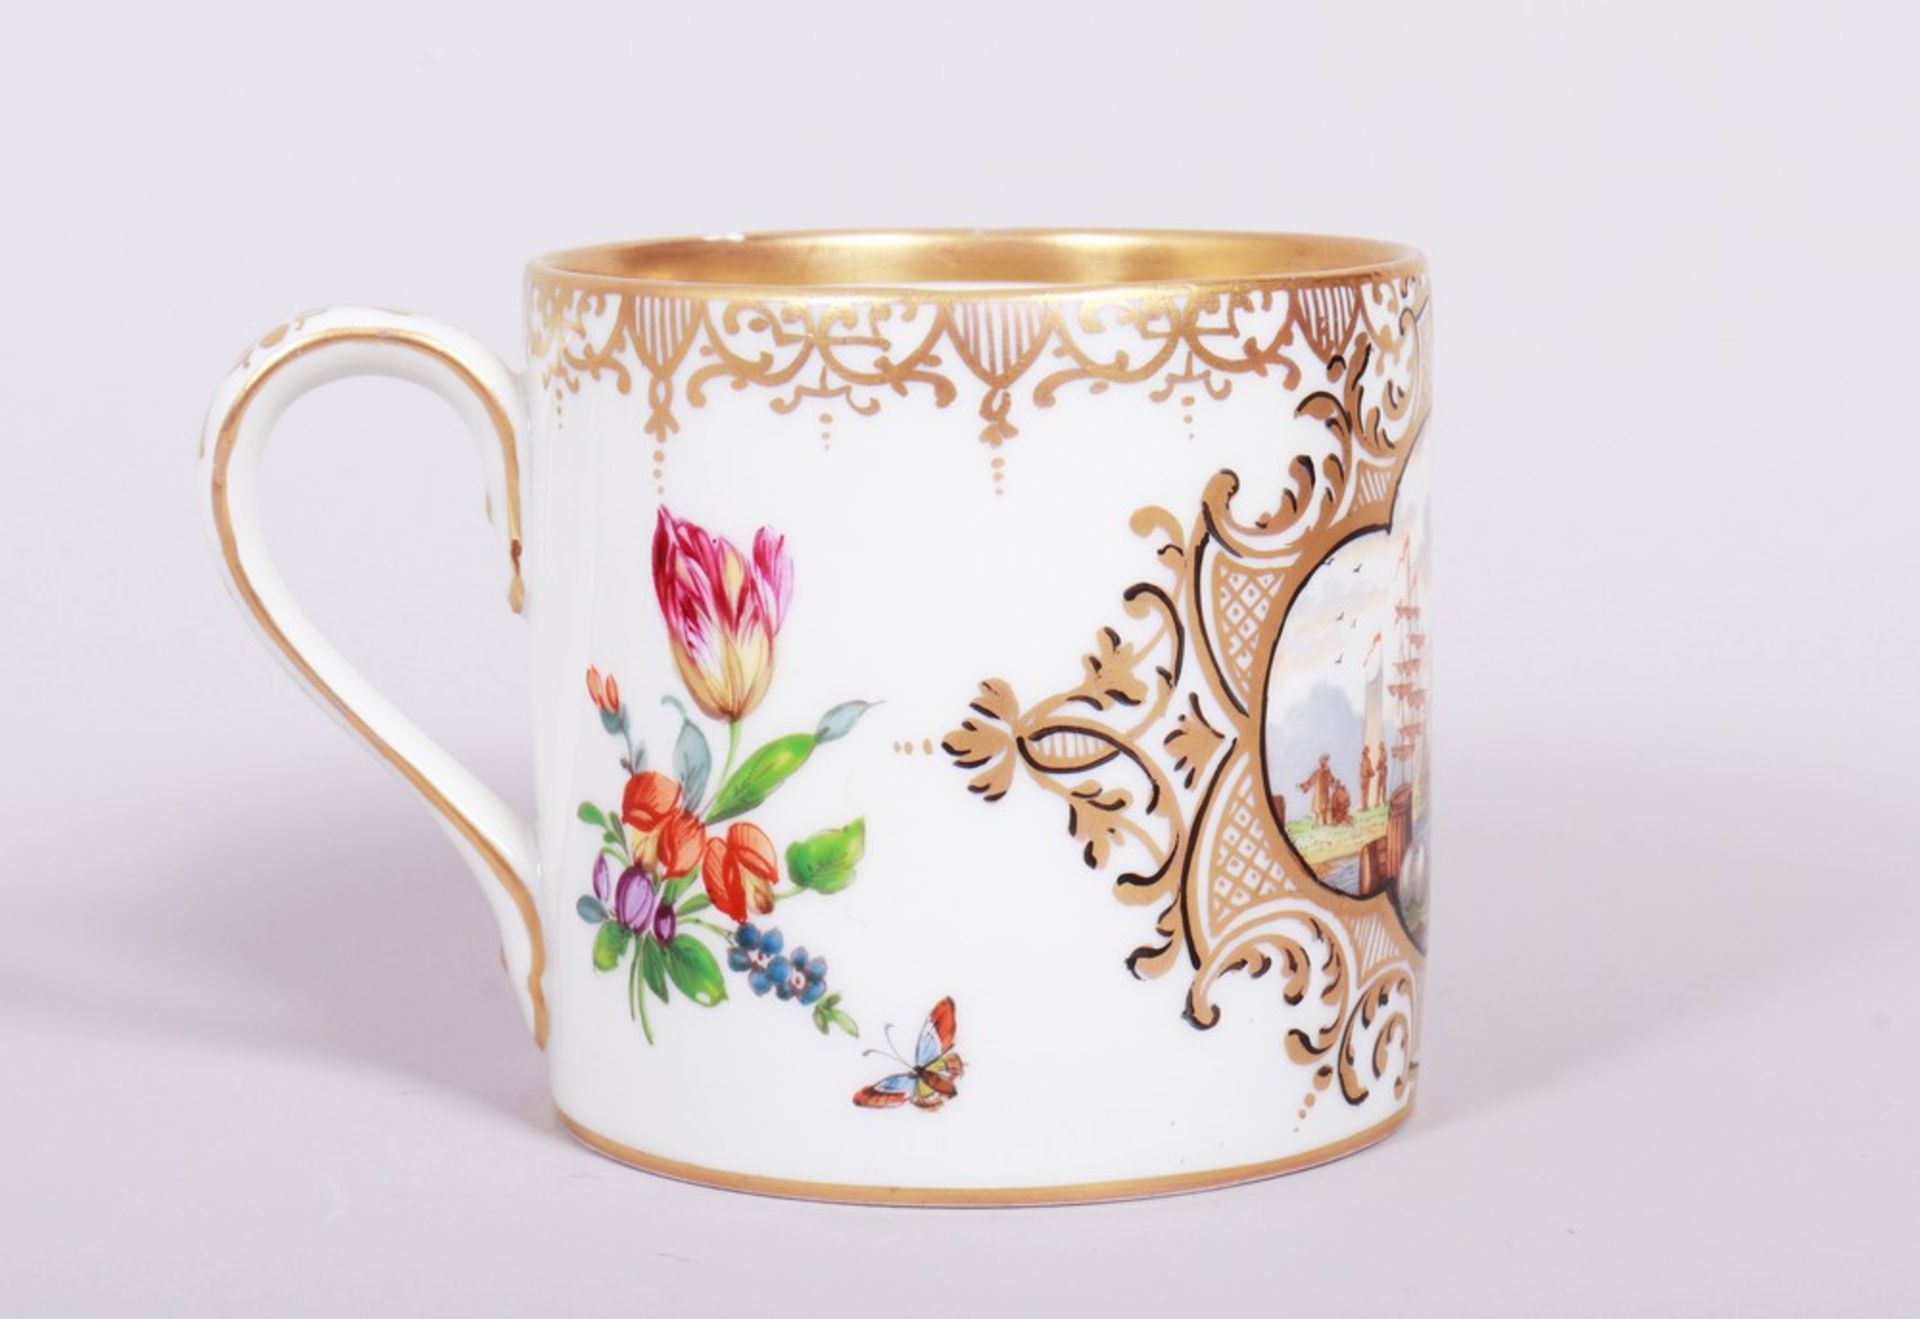 Decorative cup, KPM-Berlin, probably c. 1900 - Image 3 of 4